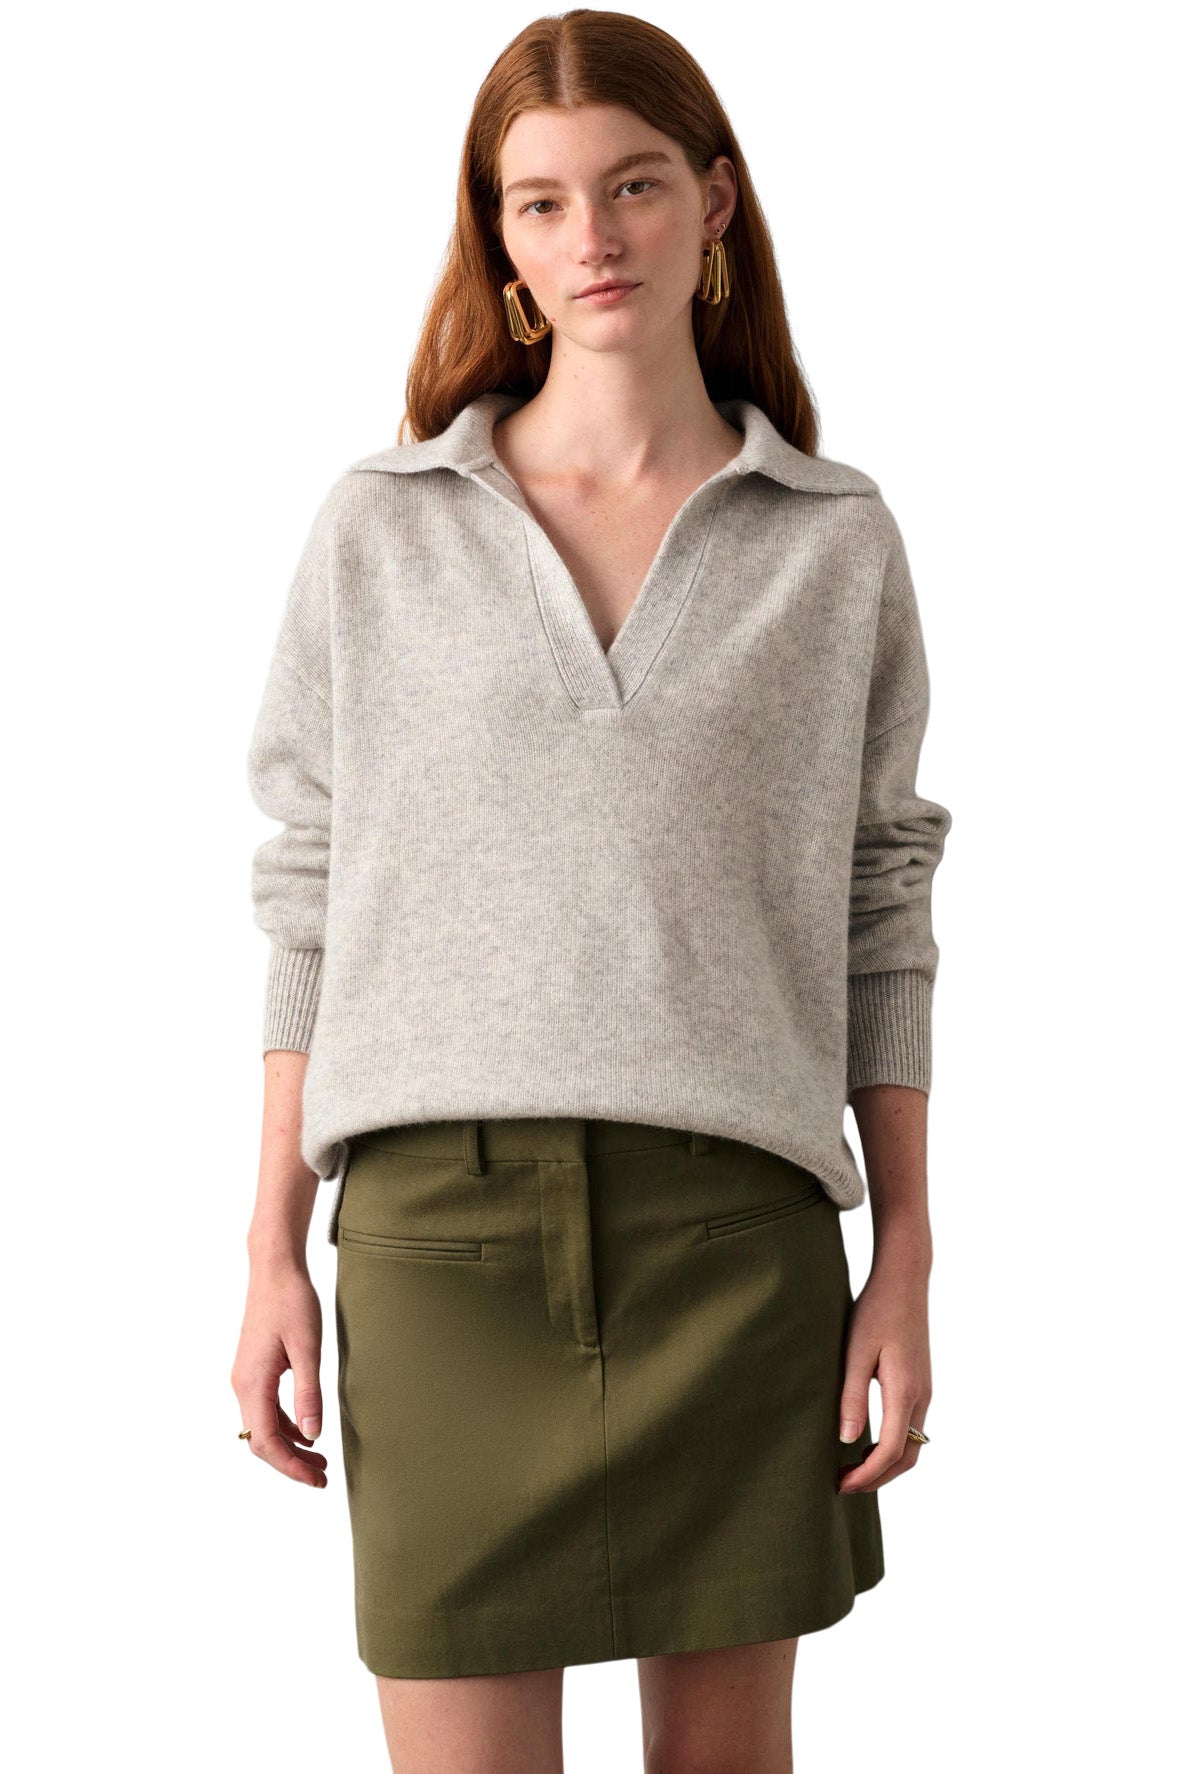 White & Warren Cashmere Ribbed Polo Sweater in Misty Grey Heather